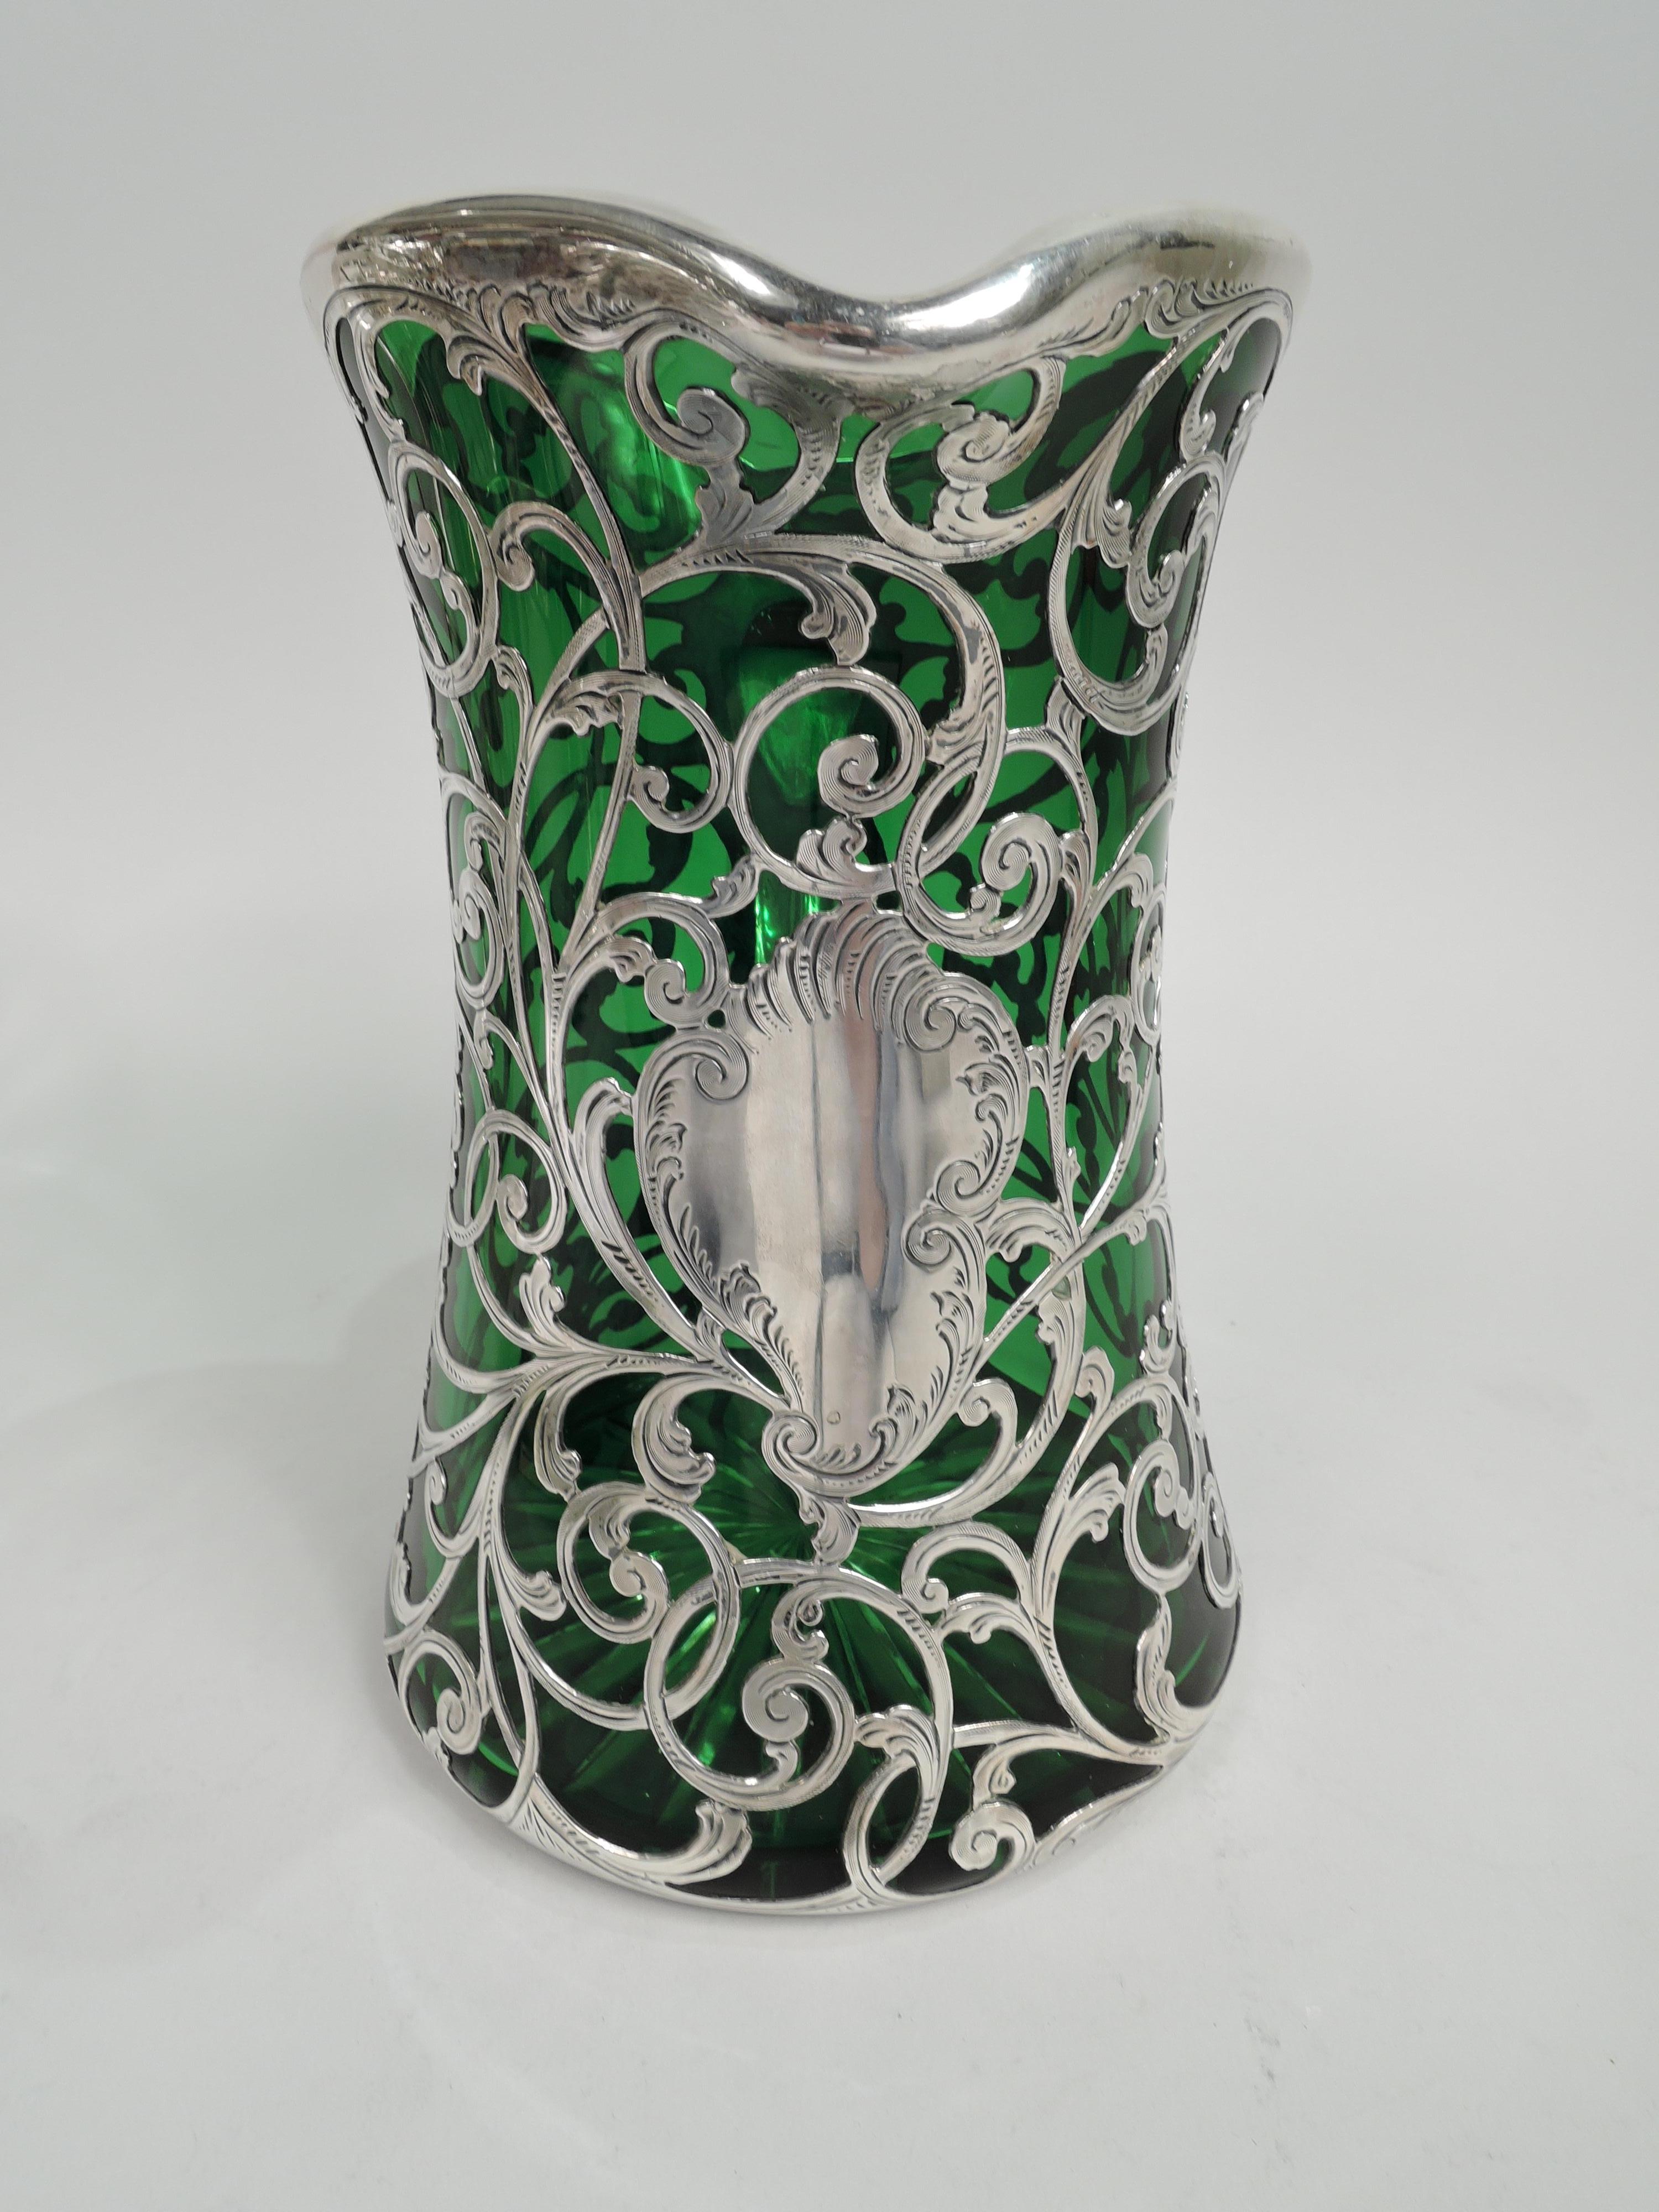 Turn-of-the-century Art Nouveau glass jug with engraved silver overlay. Made by Gorham in Providence. Waisted cylinder with scalloped mouth and small lip spout. Overlay in form of loose and entwined leafing scrollwork, and asymmetrical cartouche